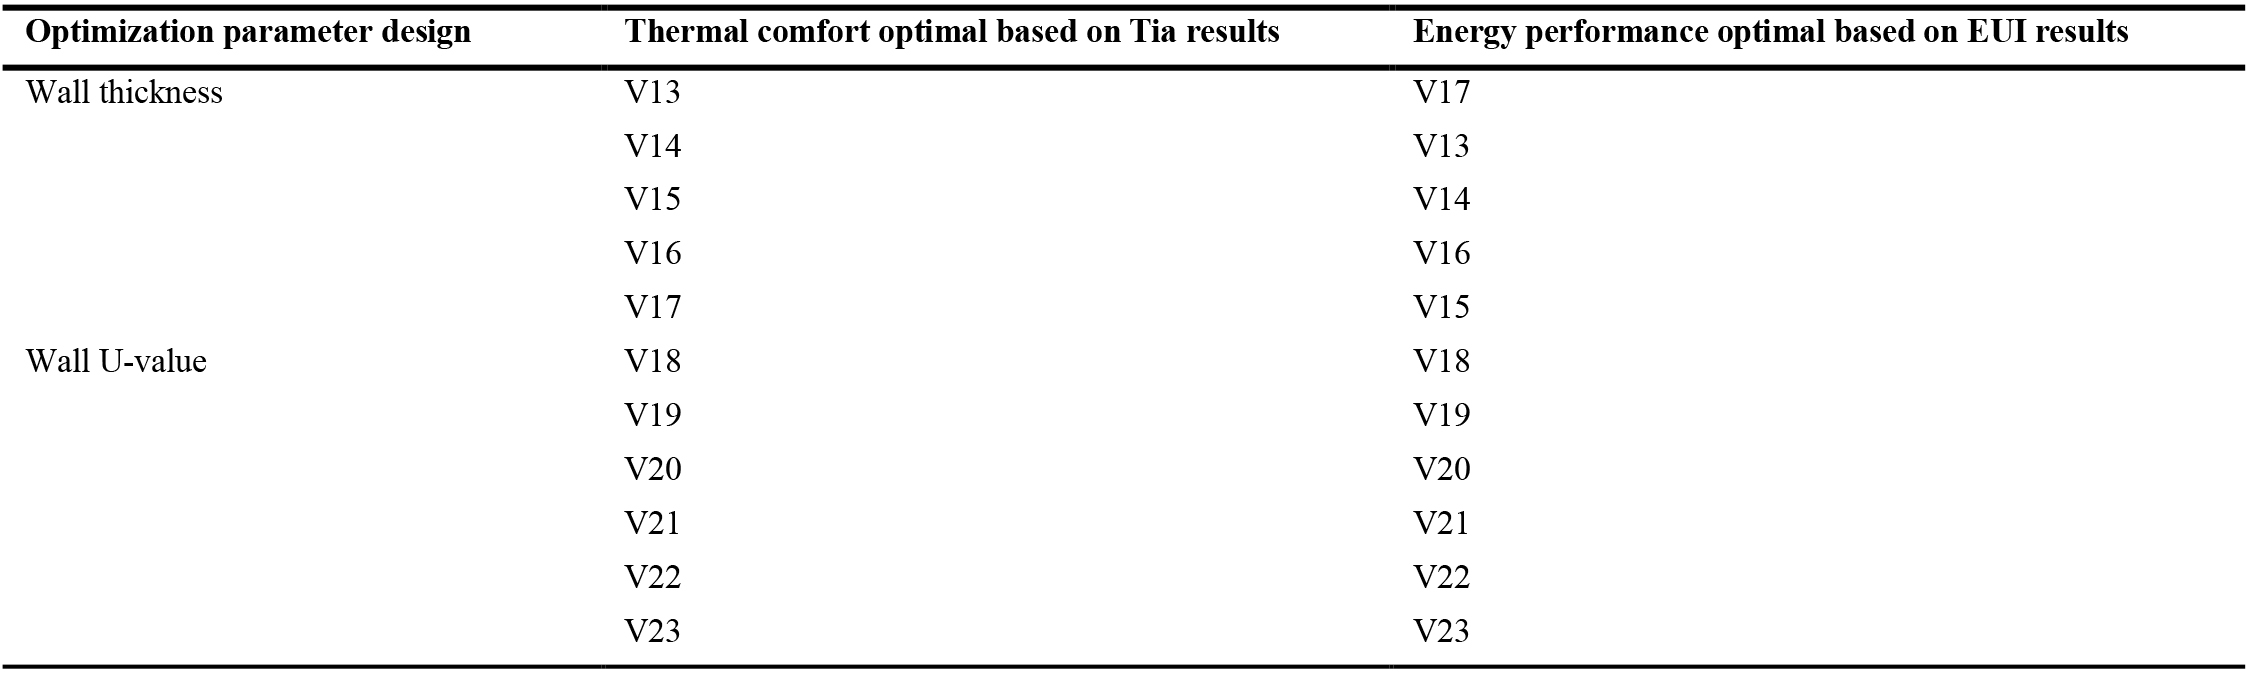 Optimal variables of thermal comfort and energy performance.